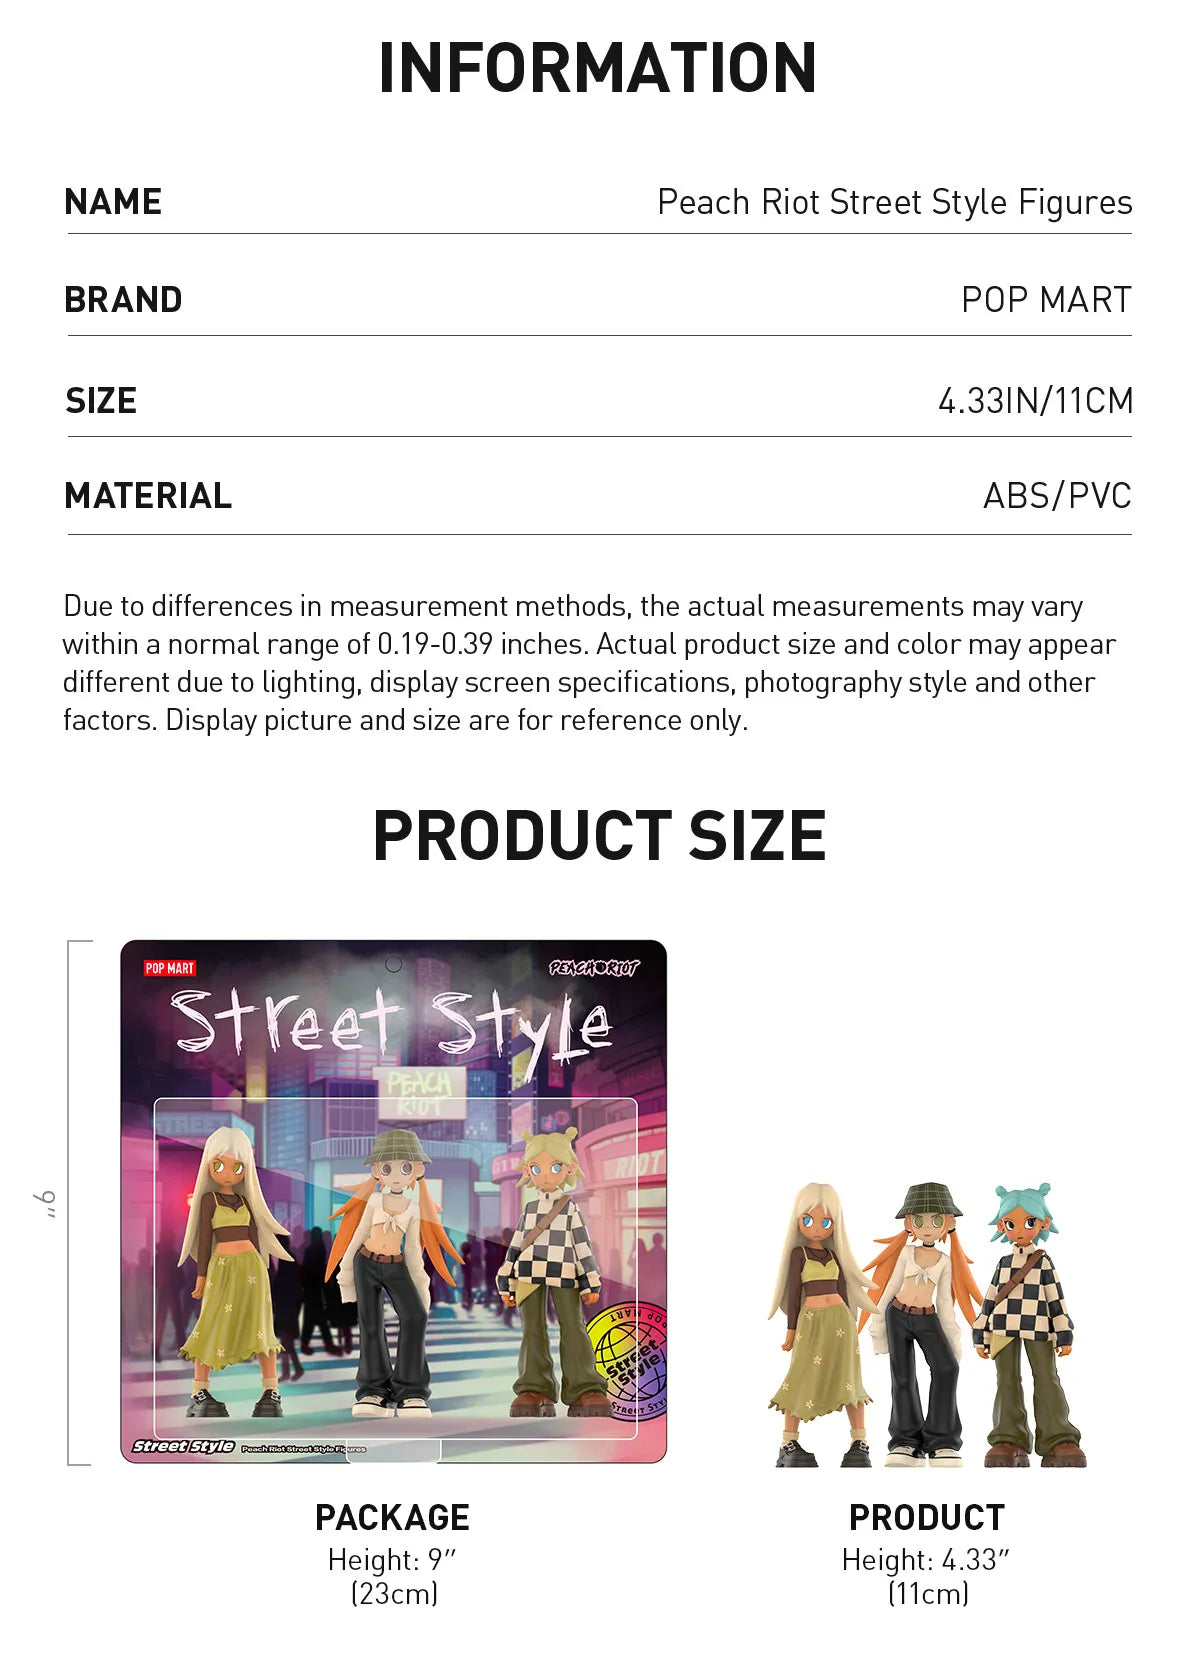 A blind box set from Strangecat Toys: Peach Riot Street Style Figures with cartoon characters and toy figures in ABS/PVC, 4.33 inch size.